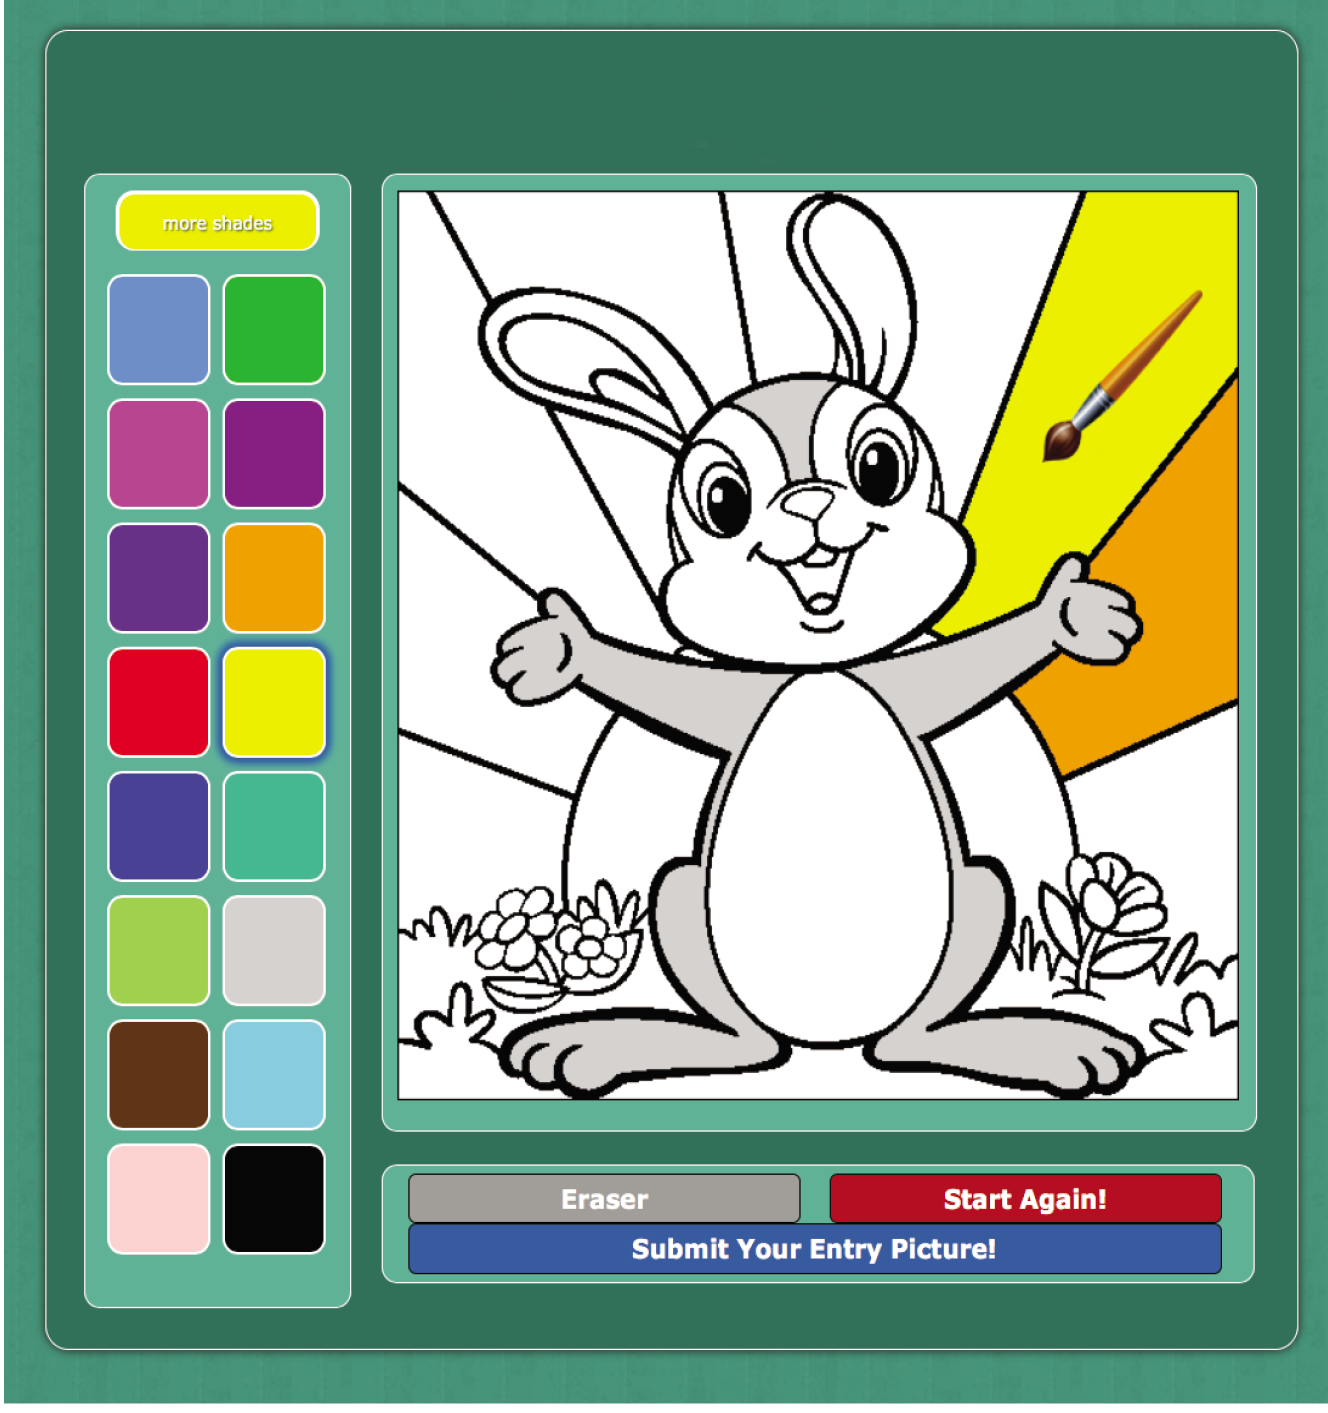 Contest Colouring Page